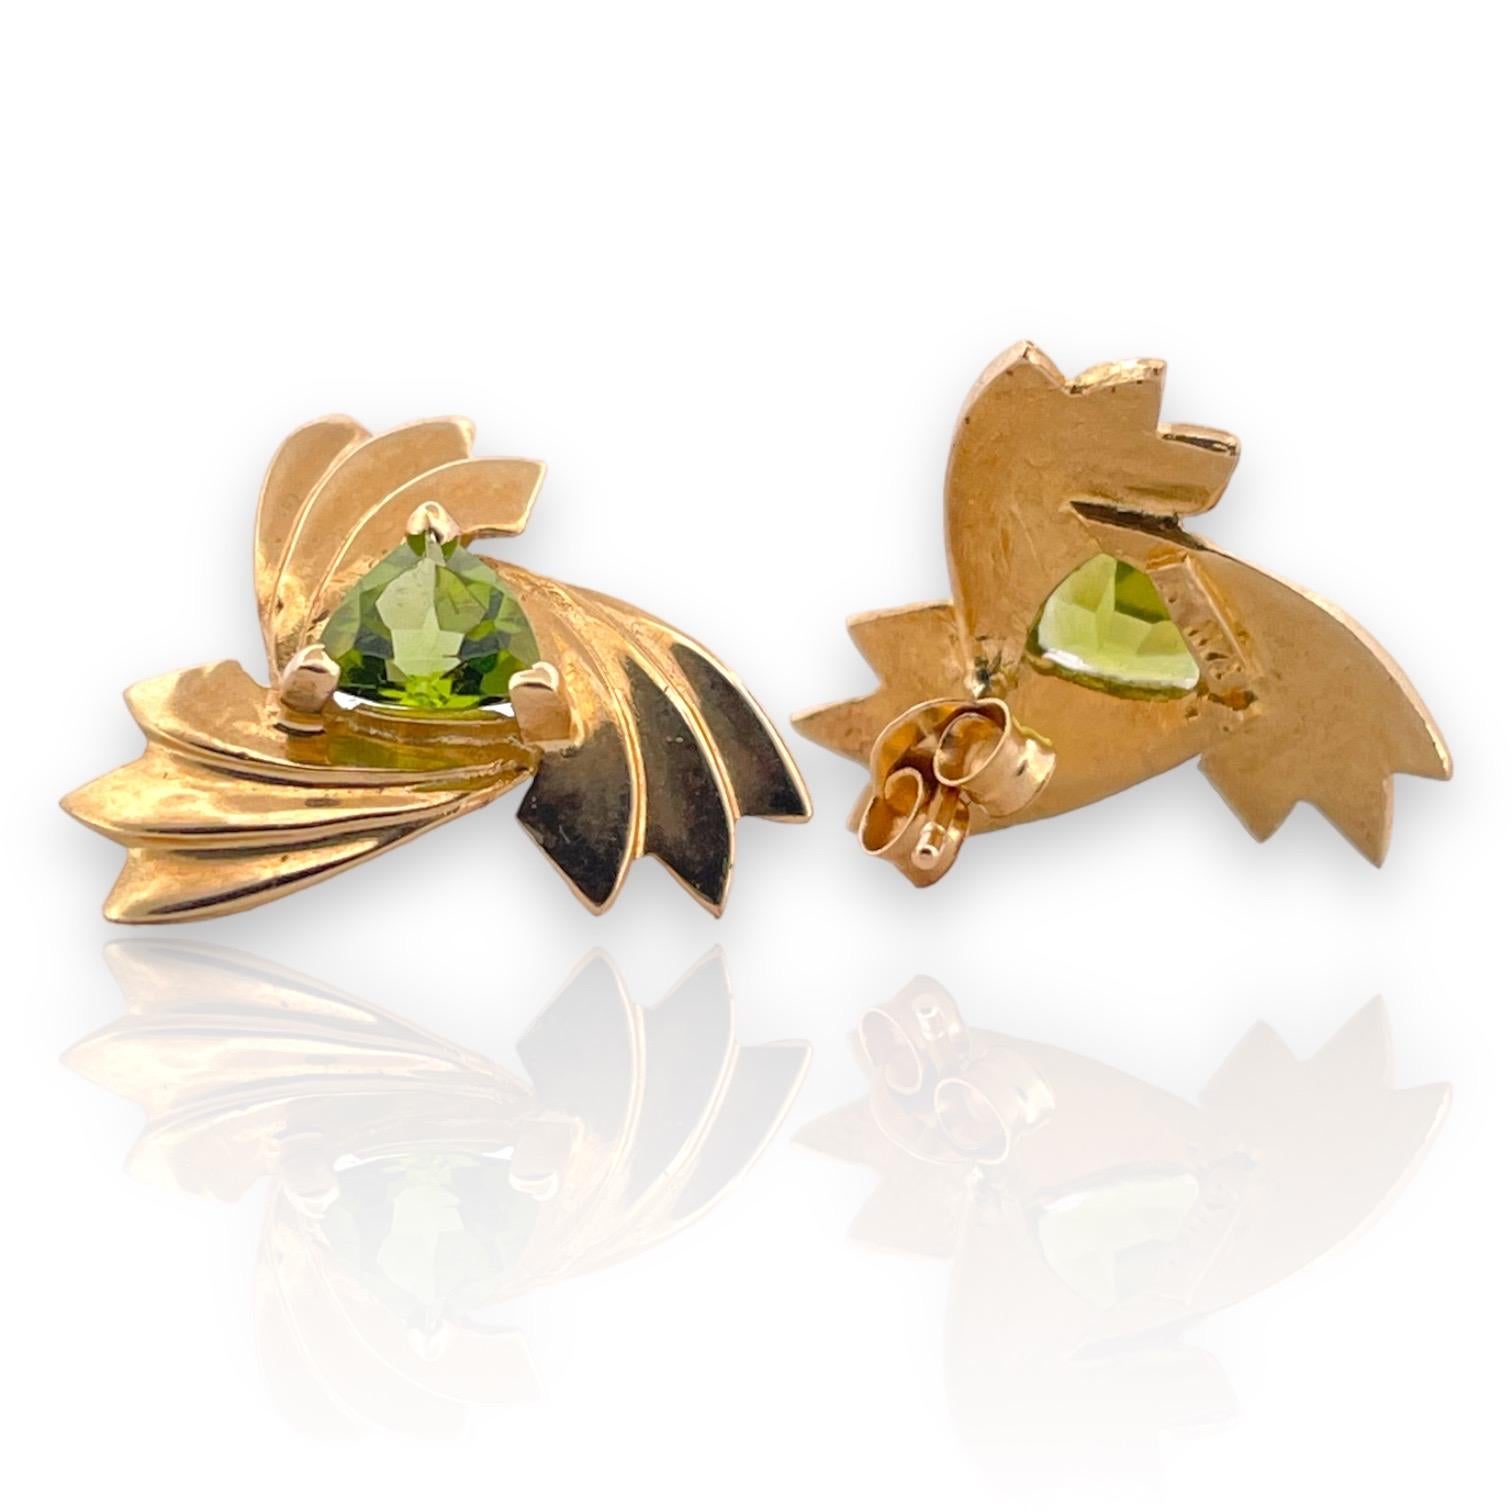 Infuse your style with a touch of fortune and a dash of verdant splendor with our Lucky Charm Peridot Clover Stud Earrings. Meticulously crafted in gleaming 14K yellow gold, these enchanting earrings feature a clover design, each leaf graced with a